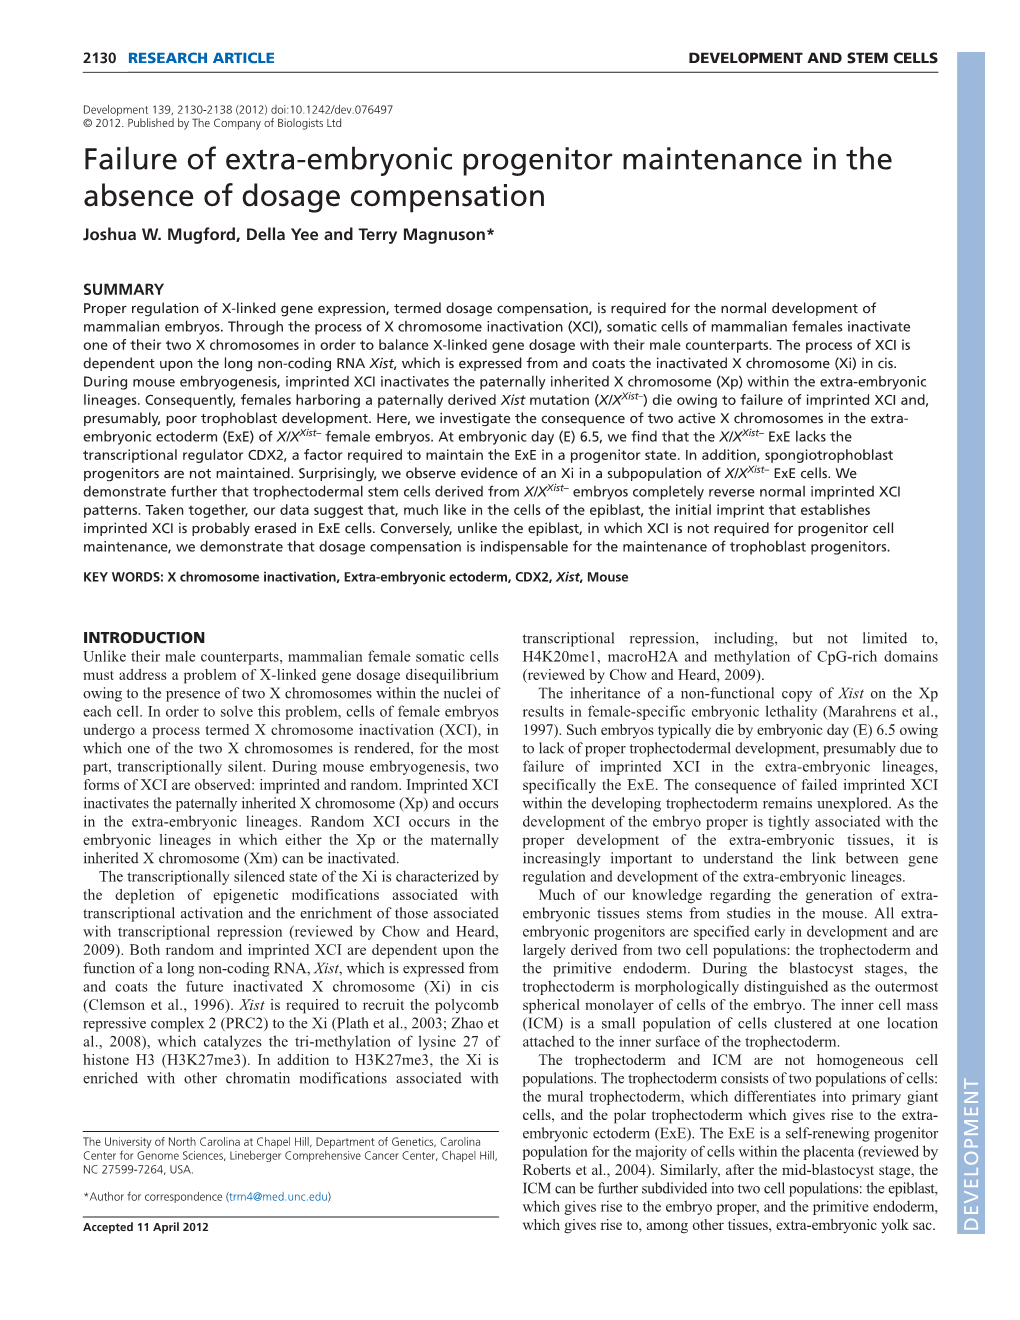 Failure of Extra-Embryonic Progenitor Maintenance in the Absence of Dosage Compensation Joshua W